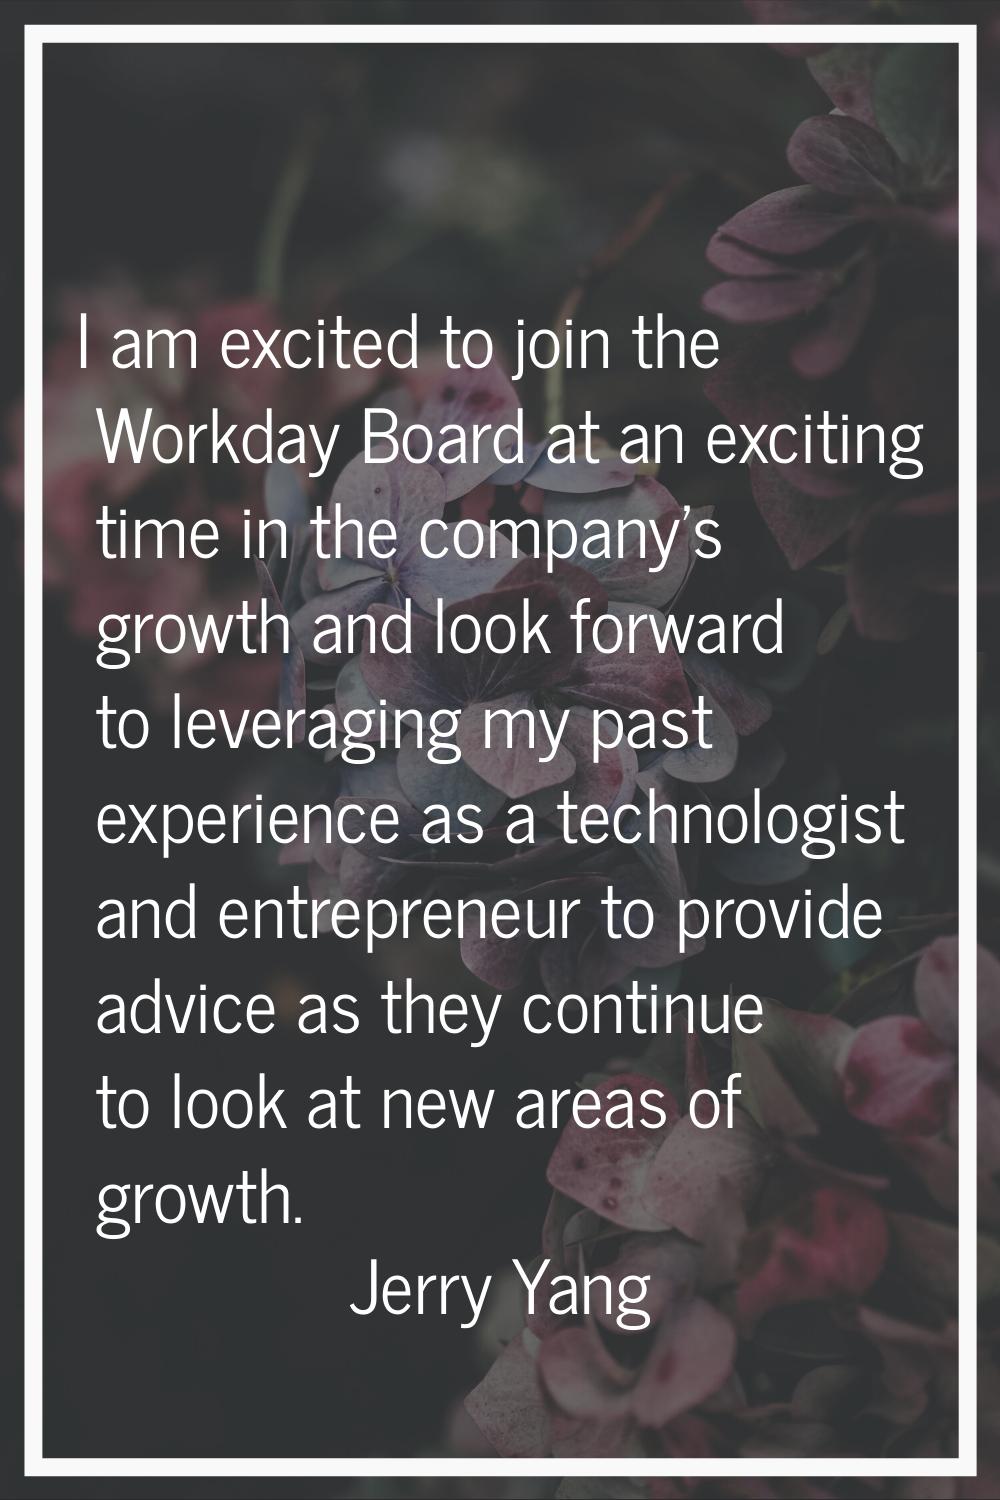 I am excited to join the Workday Board at an exciting time in the company's growth and look forward